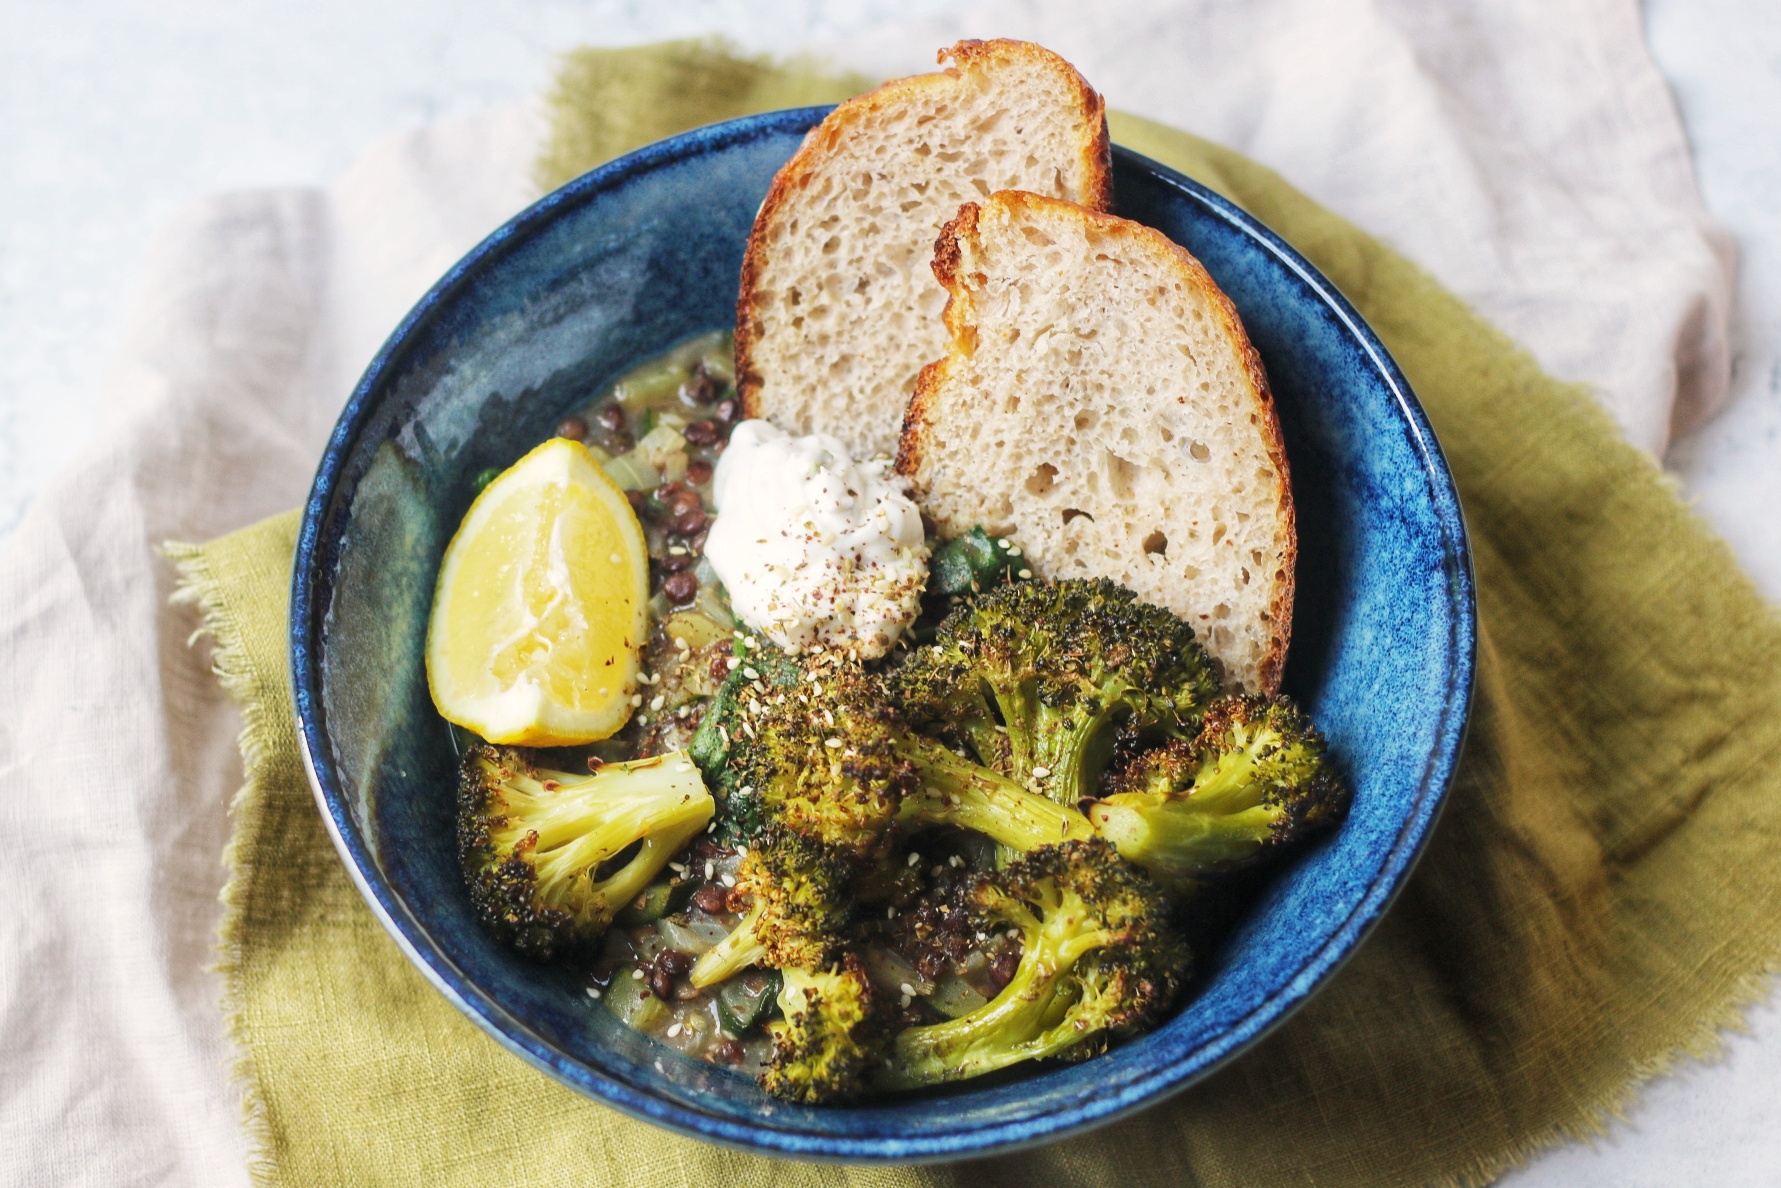 Spicy Spinach and Lentil Stew with Roasted Broccoli (vegan)